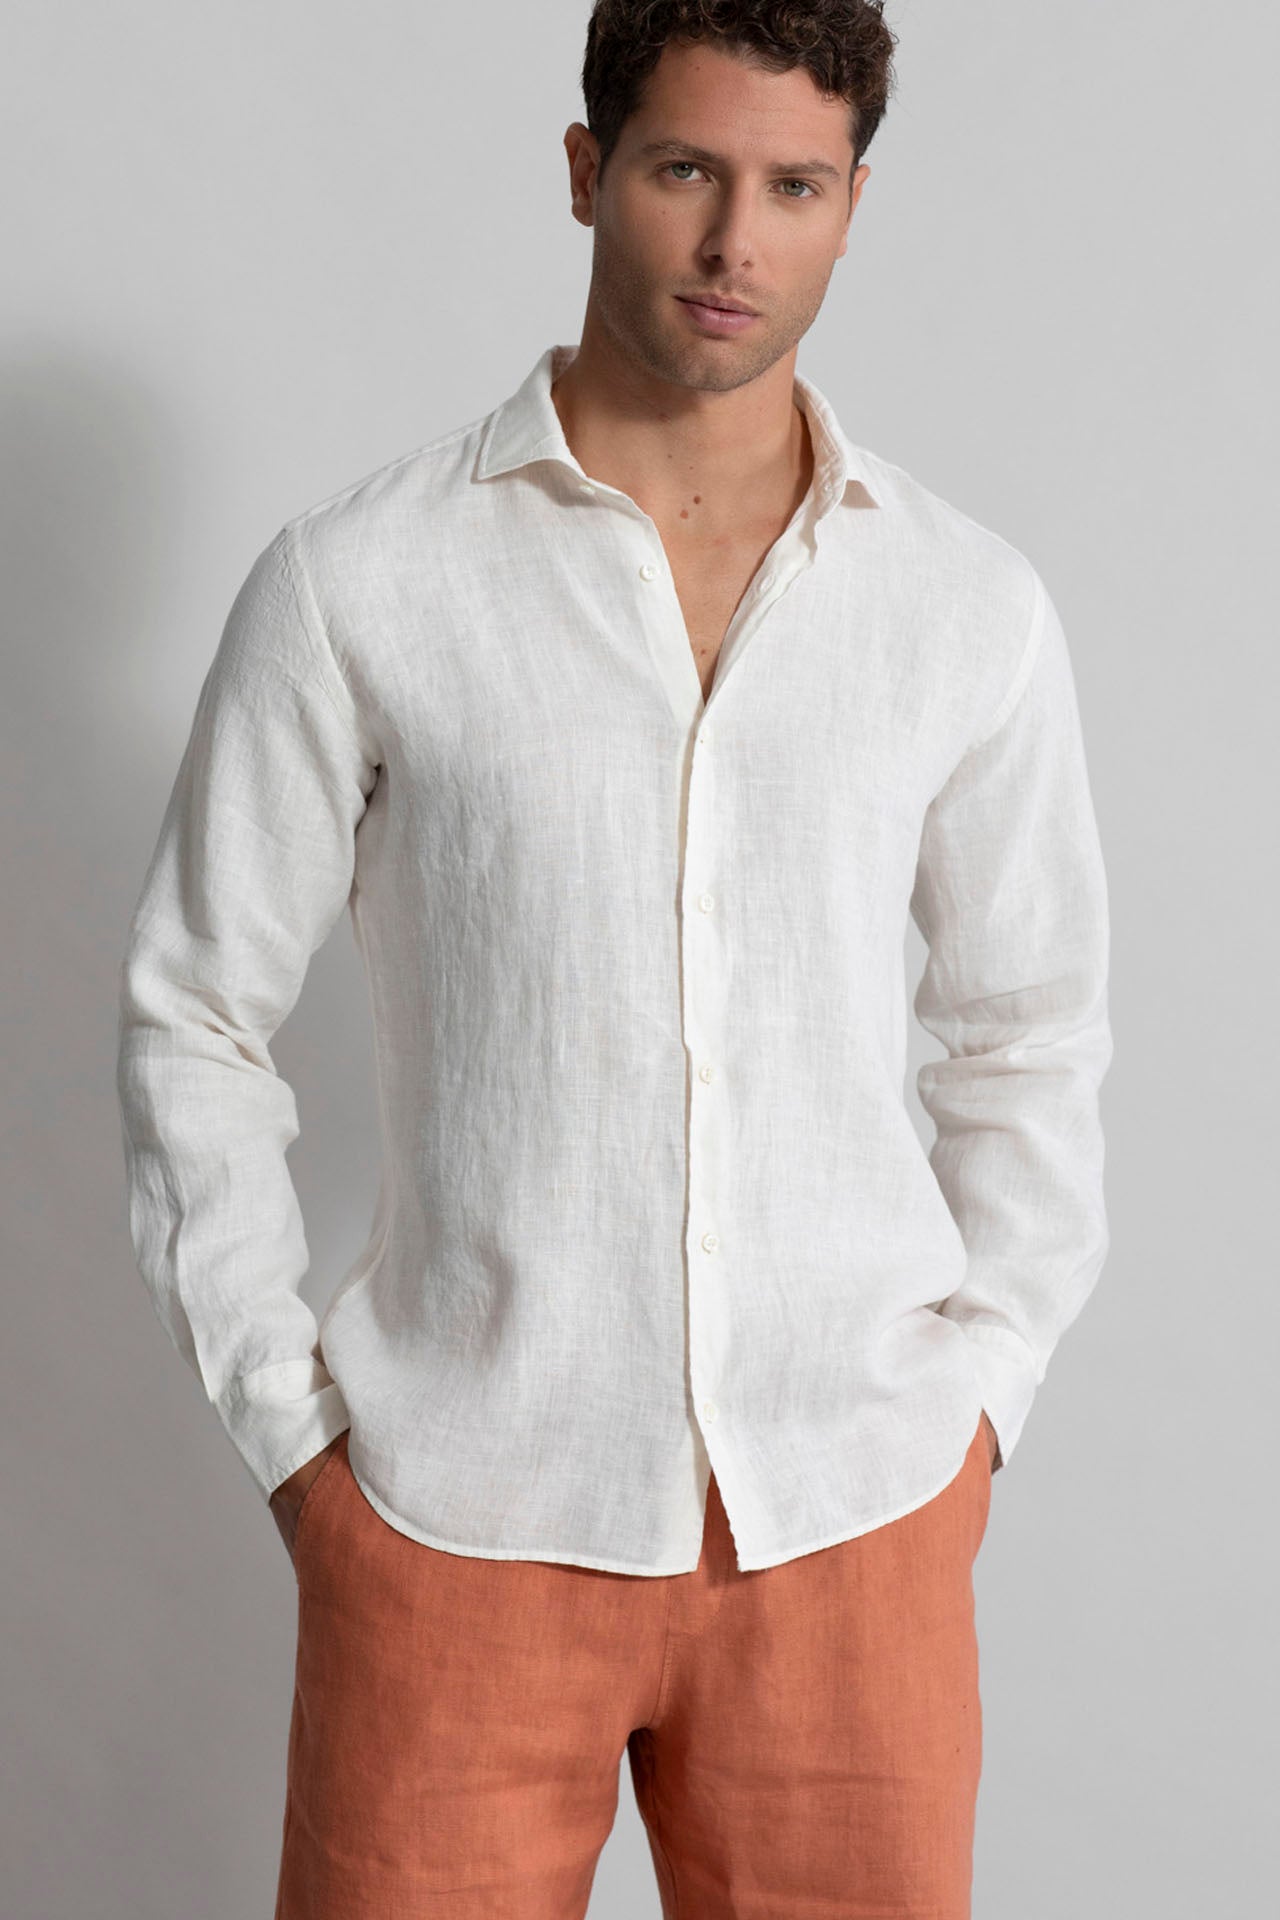 Men's Linen Shirts with Long Sleeve - White - Front view